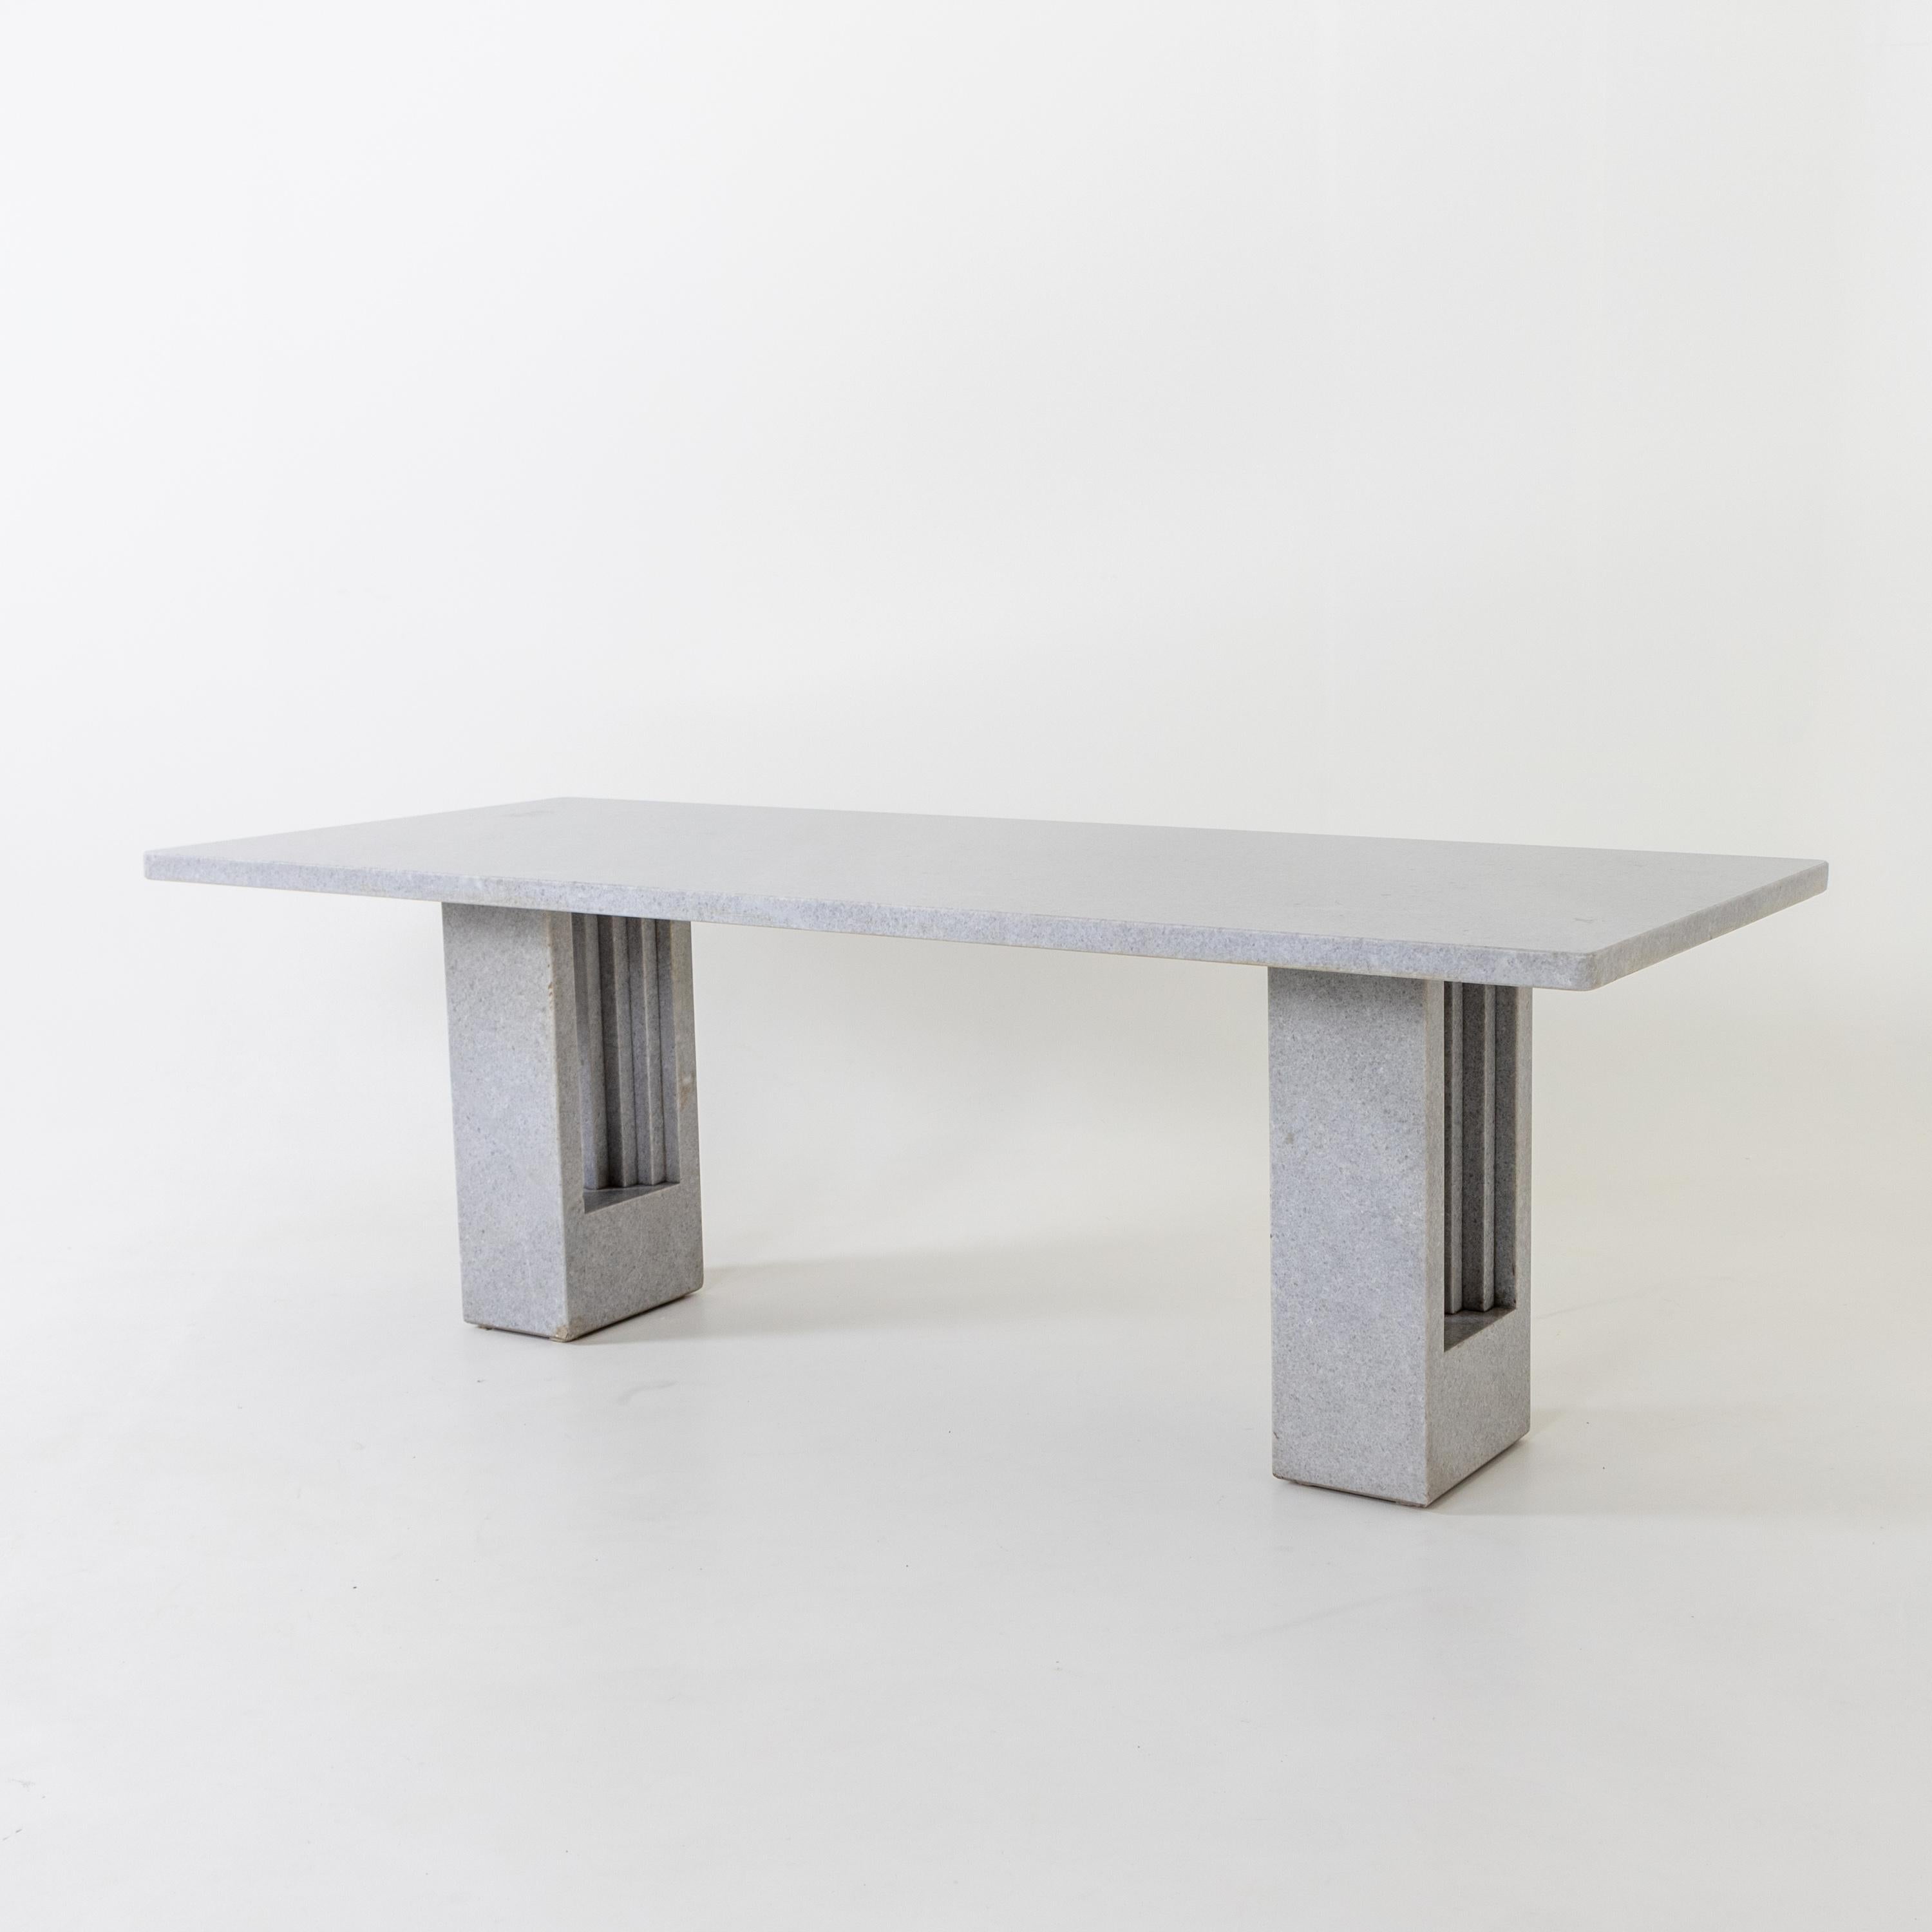 Late 20th Century 'Delfi' Dining Table by Carlo Scarpa and Marcel Breuer for Gavina, Italy, 1970s